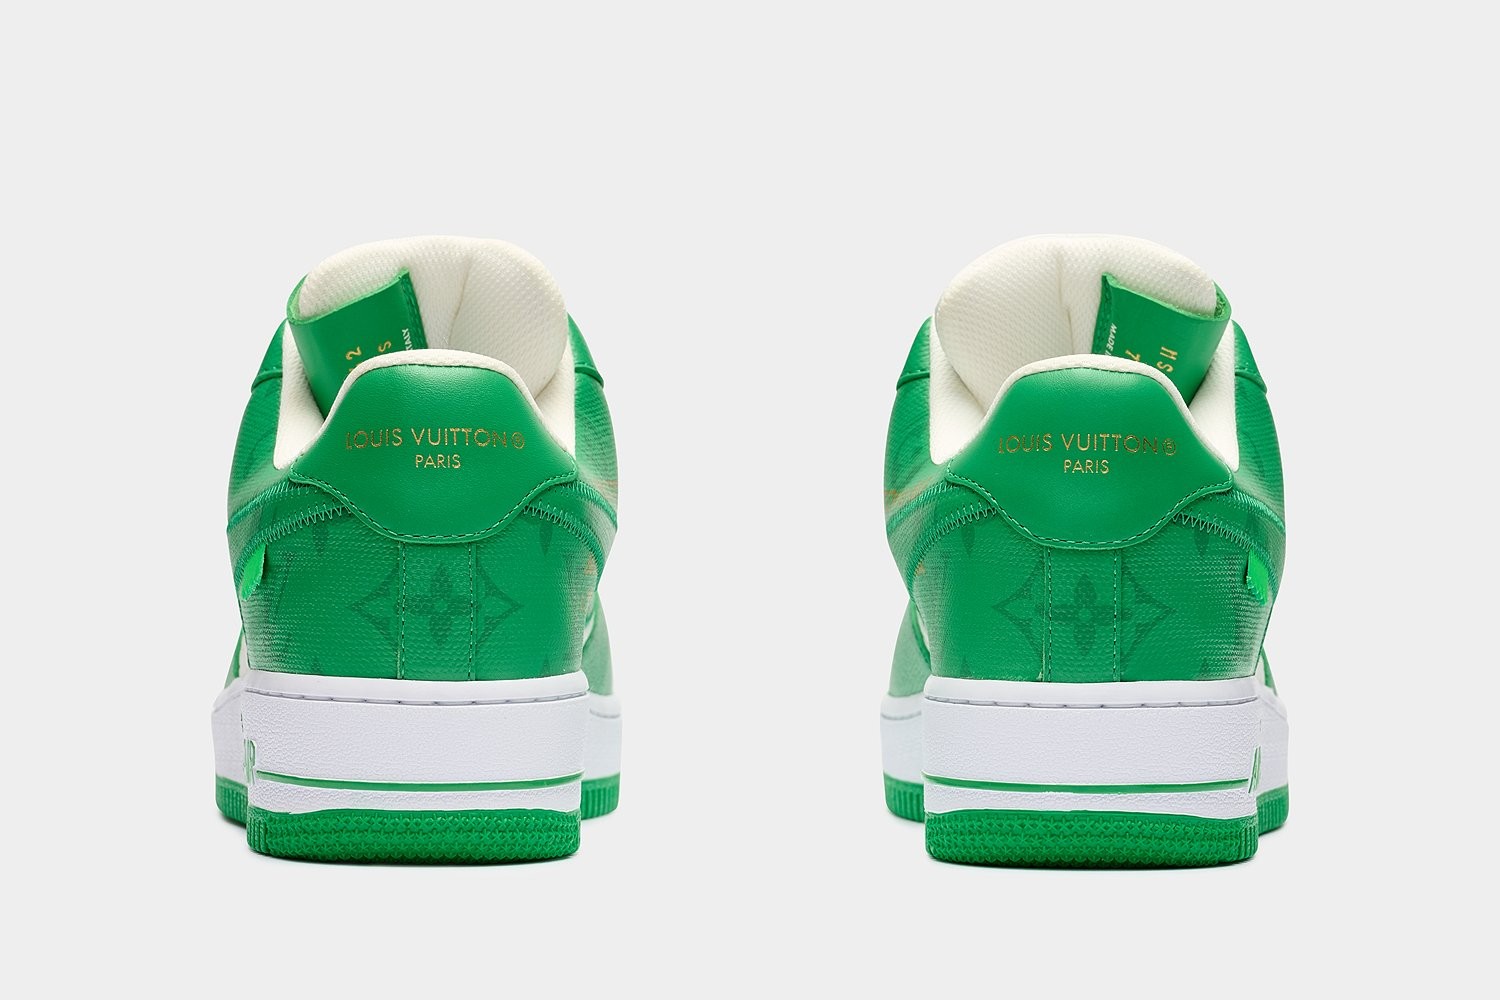 A complete series of nine Louis Vuitton and Nike “Air Force 1” by Virgil Abloh - Image 16 of 50